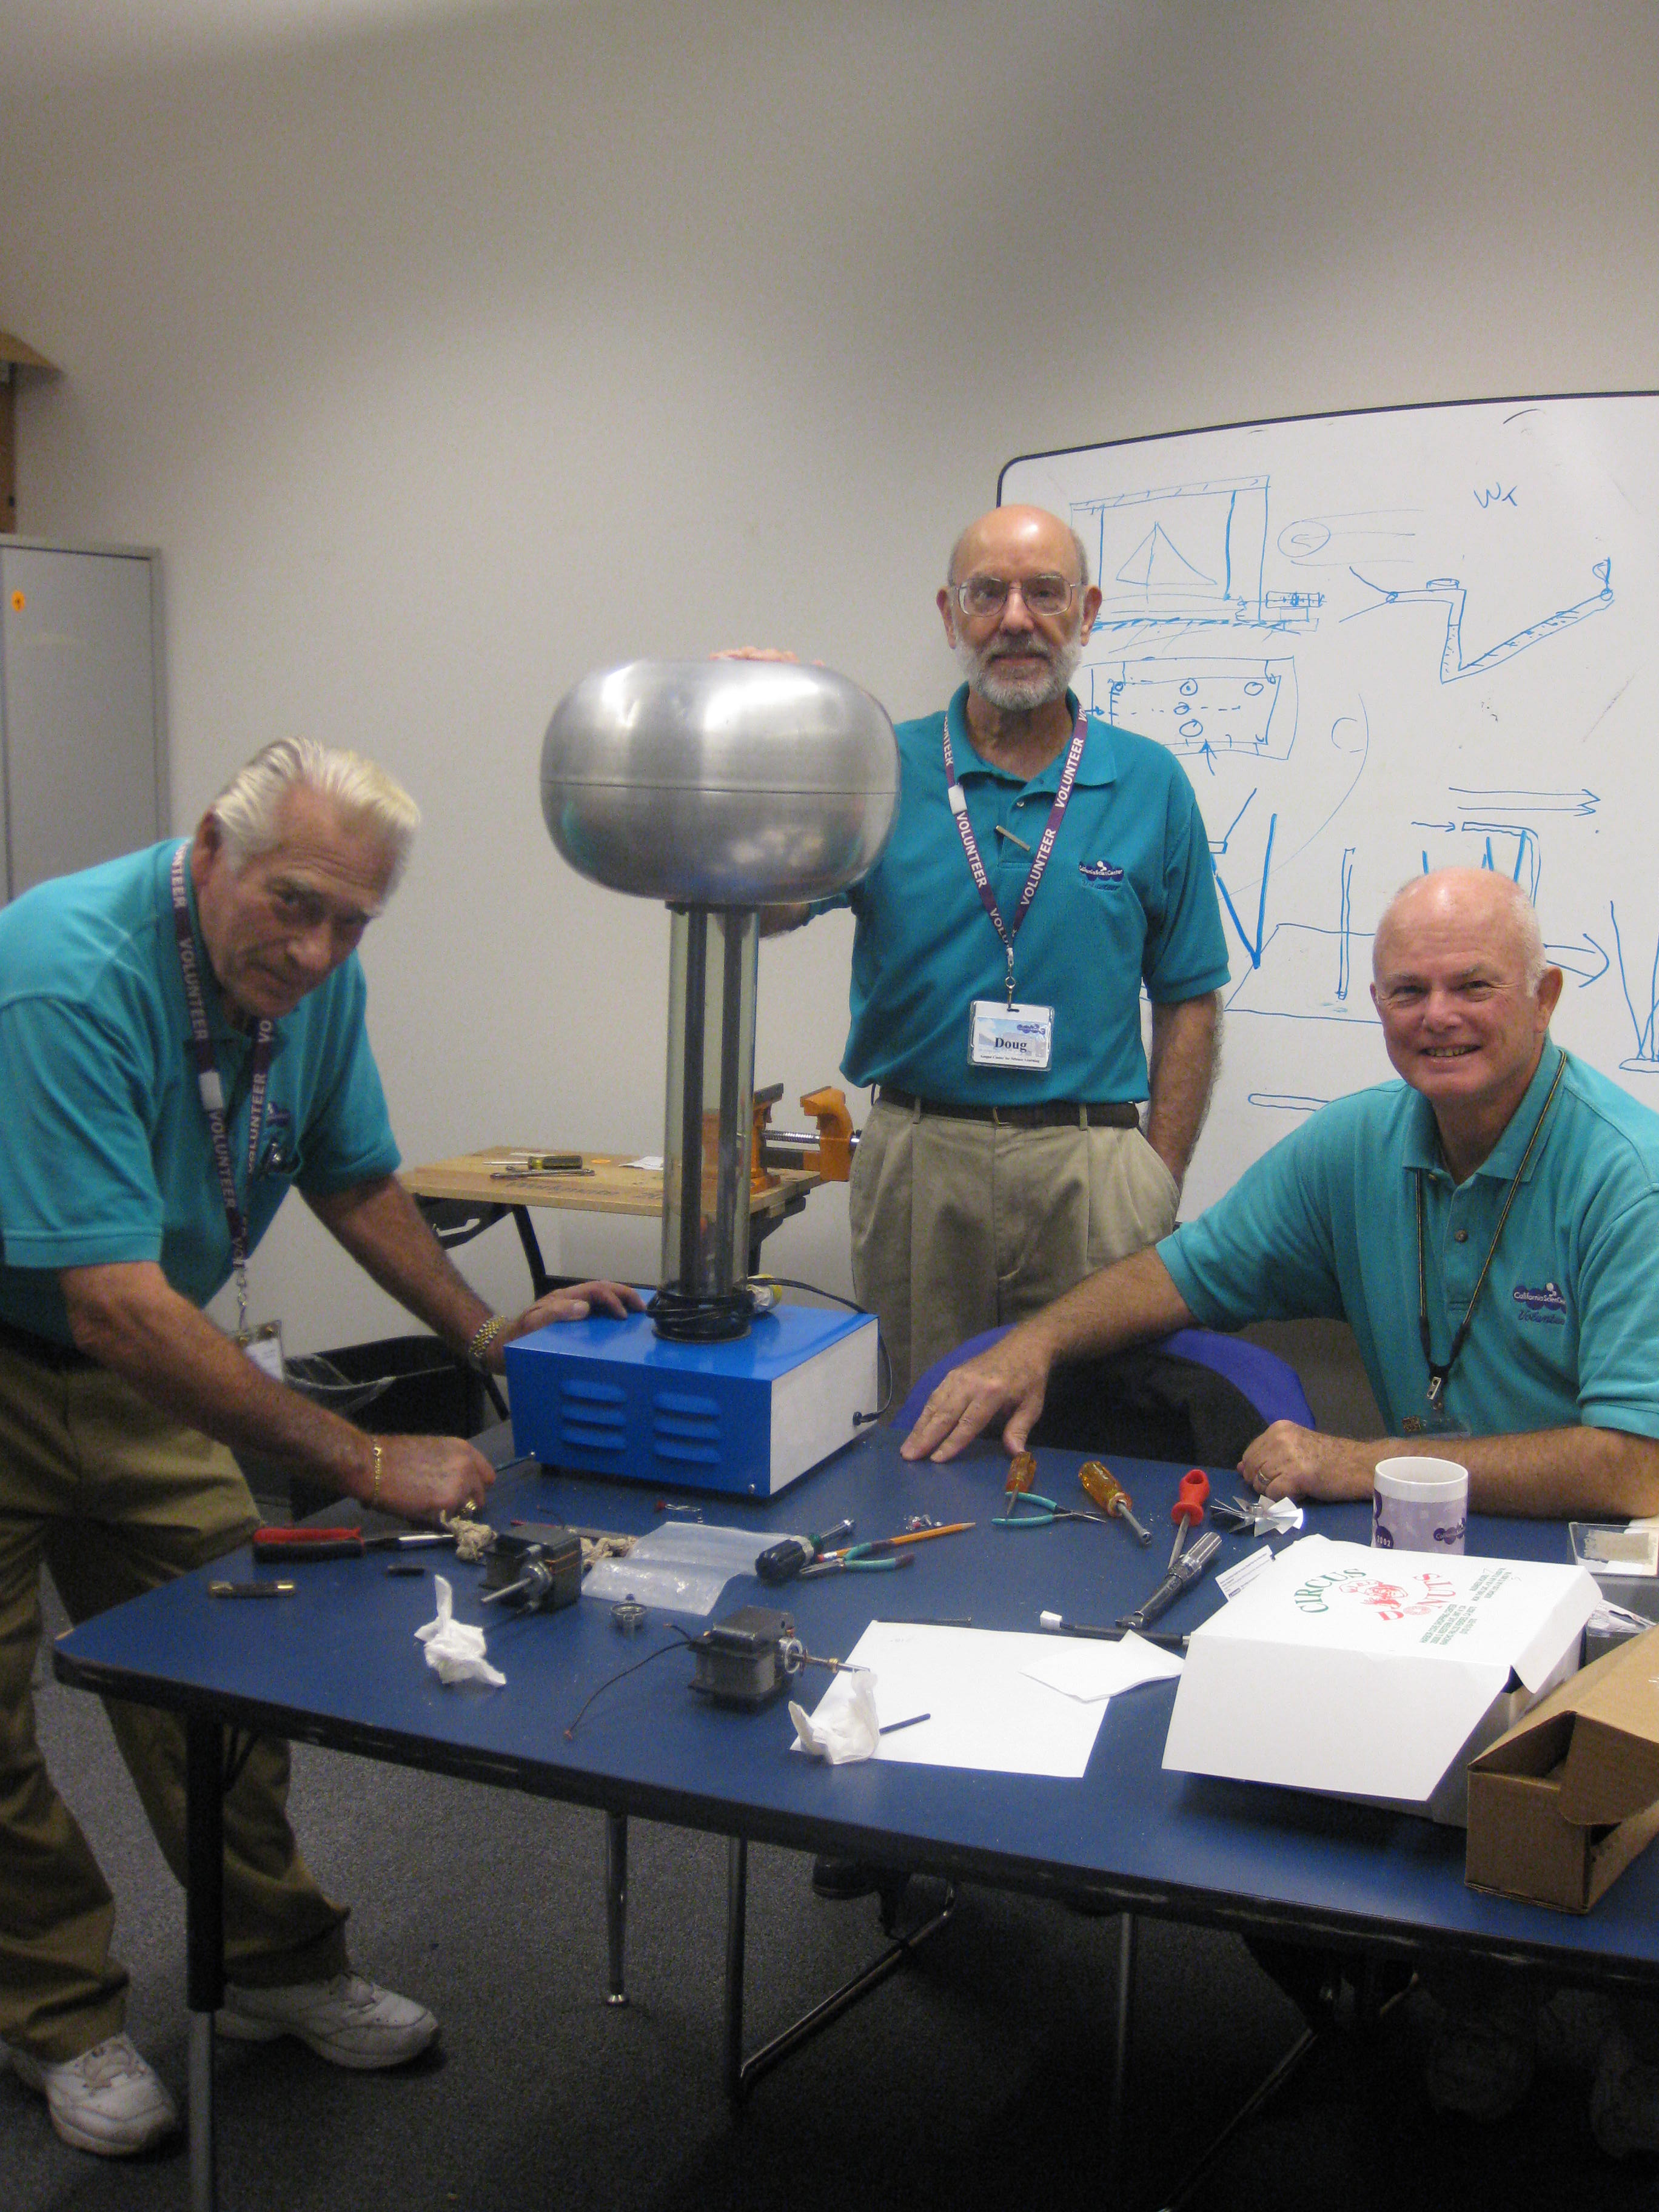 Three Air & Space Volunteers wearing teal polos stand around table with tools and parts while working on Van der Graaf Generator